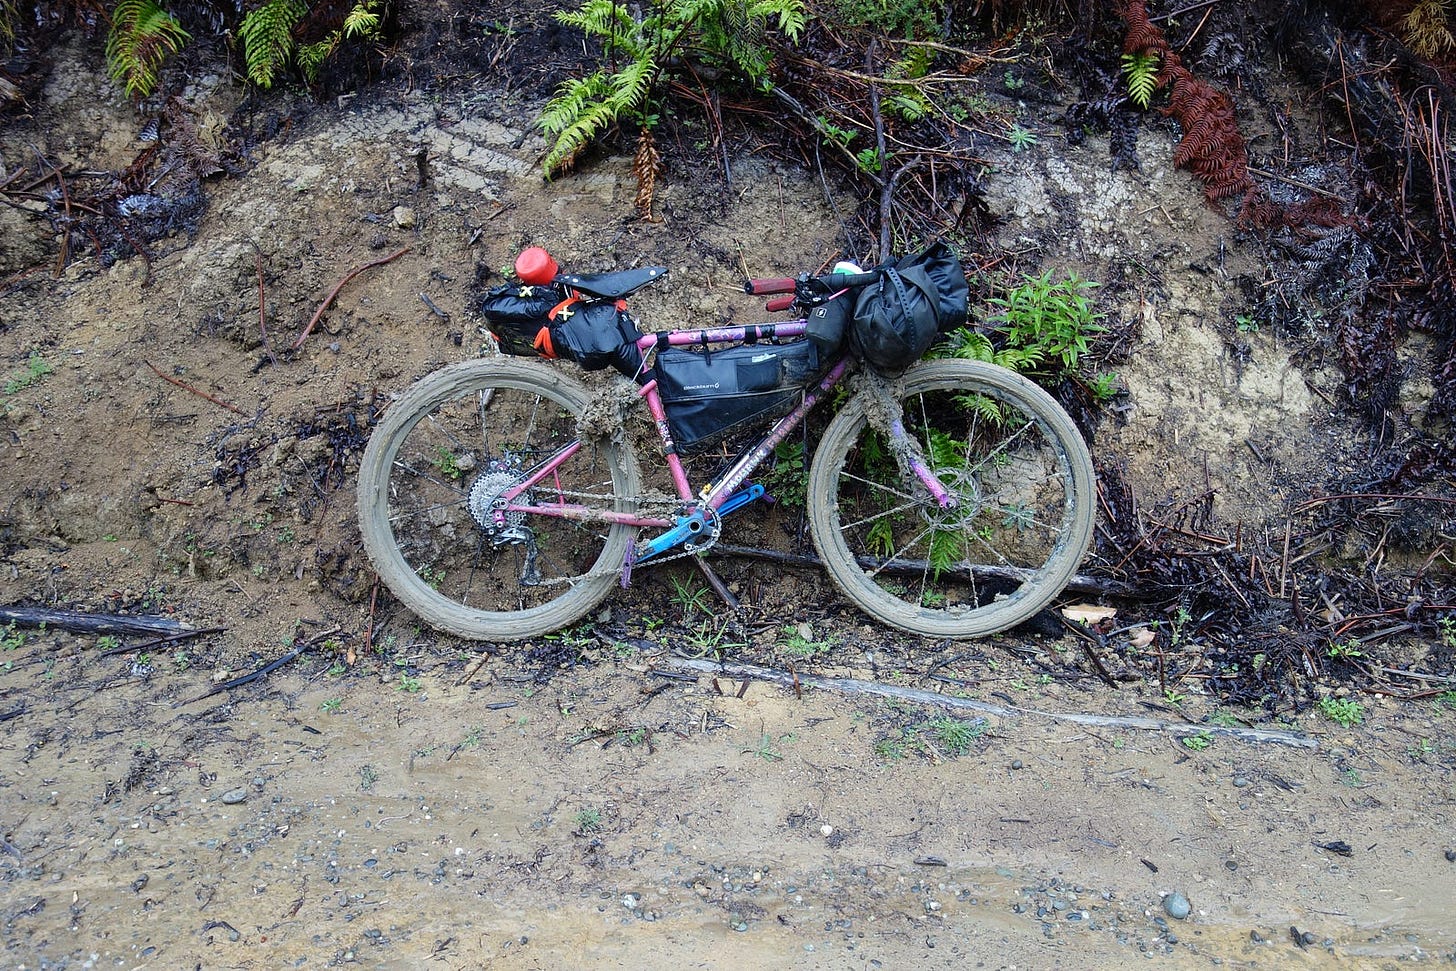 Sarah’s bike is leant against a muddy bank. The wheels are completely clogged with thick mud.